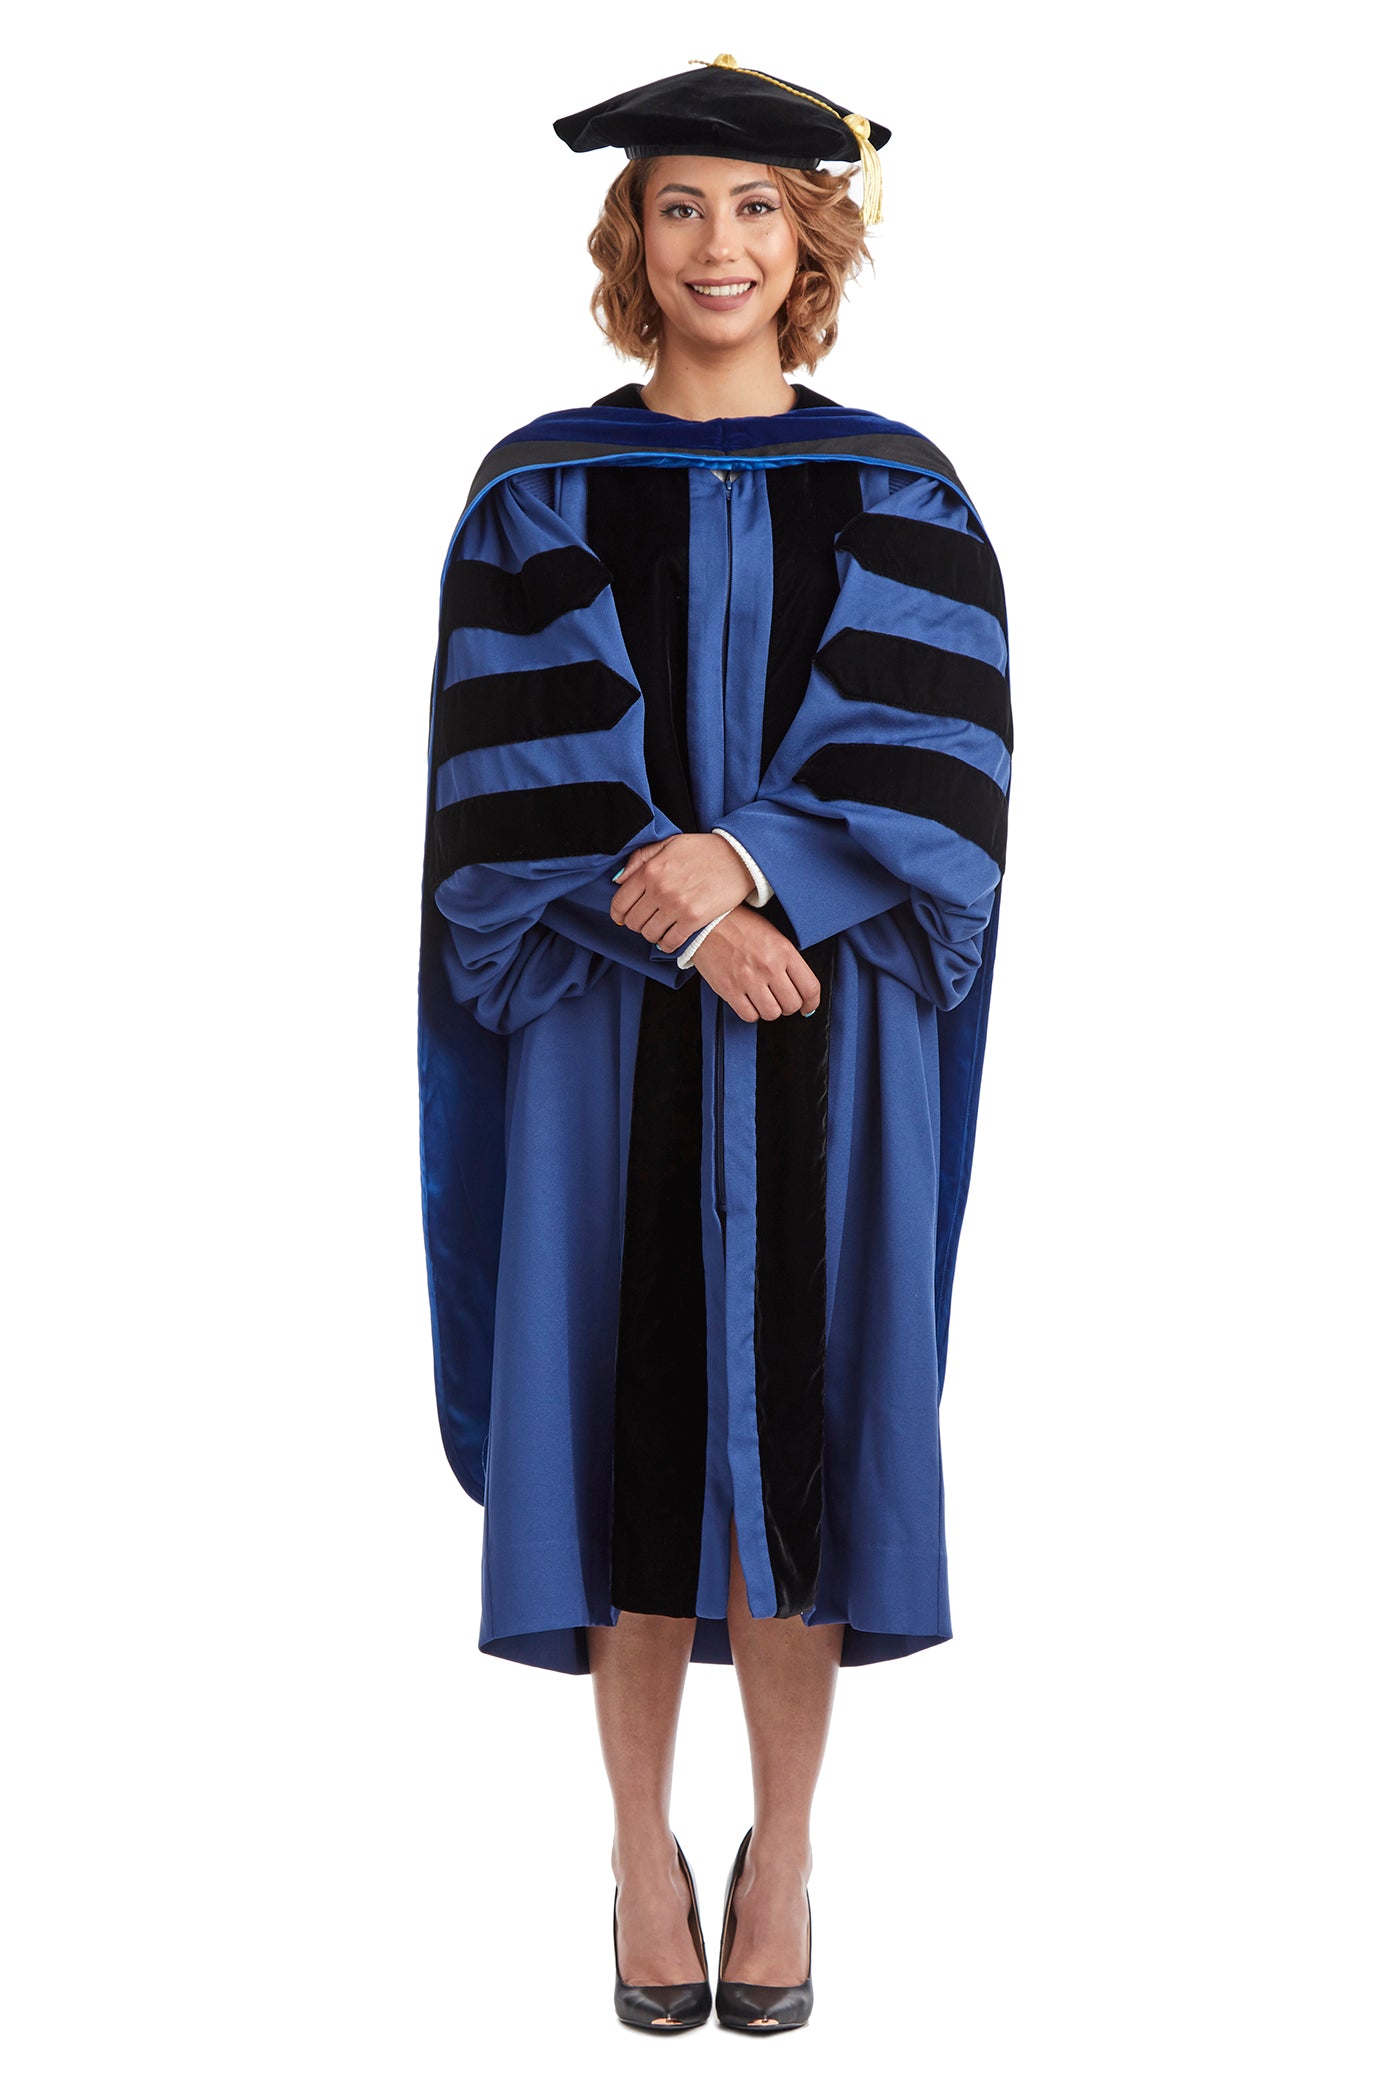 Buy Doctoral Graduation Online In India - Etsy India